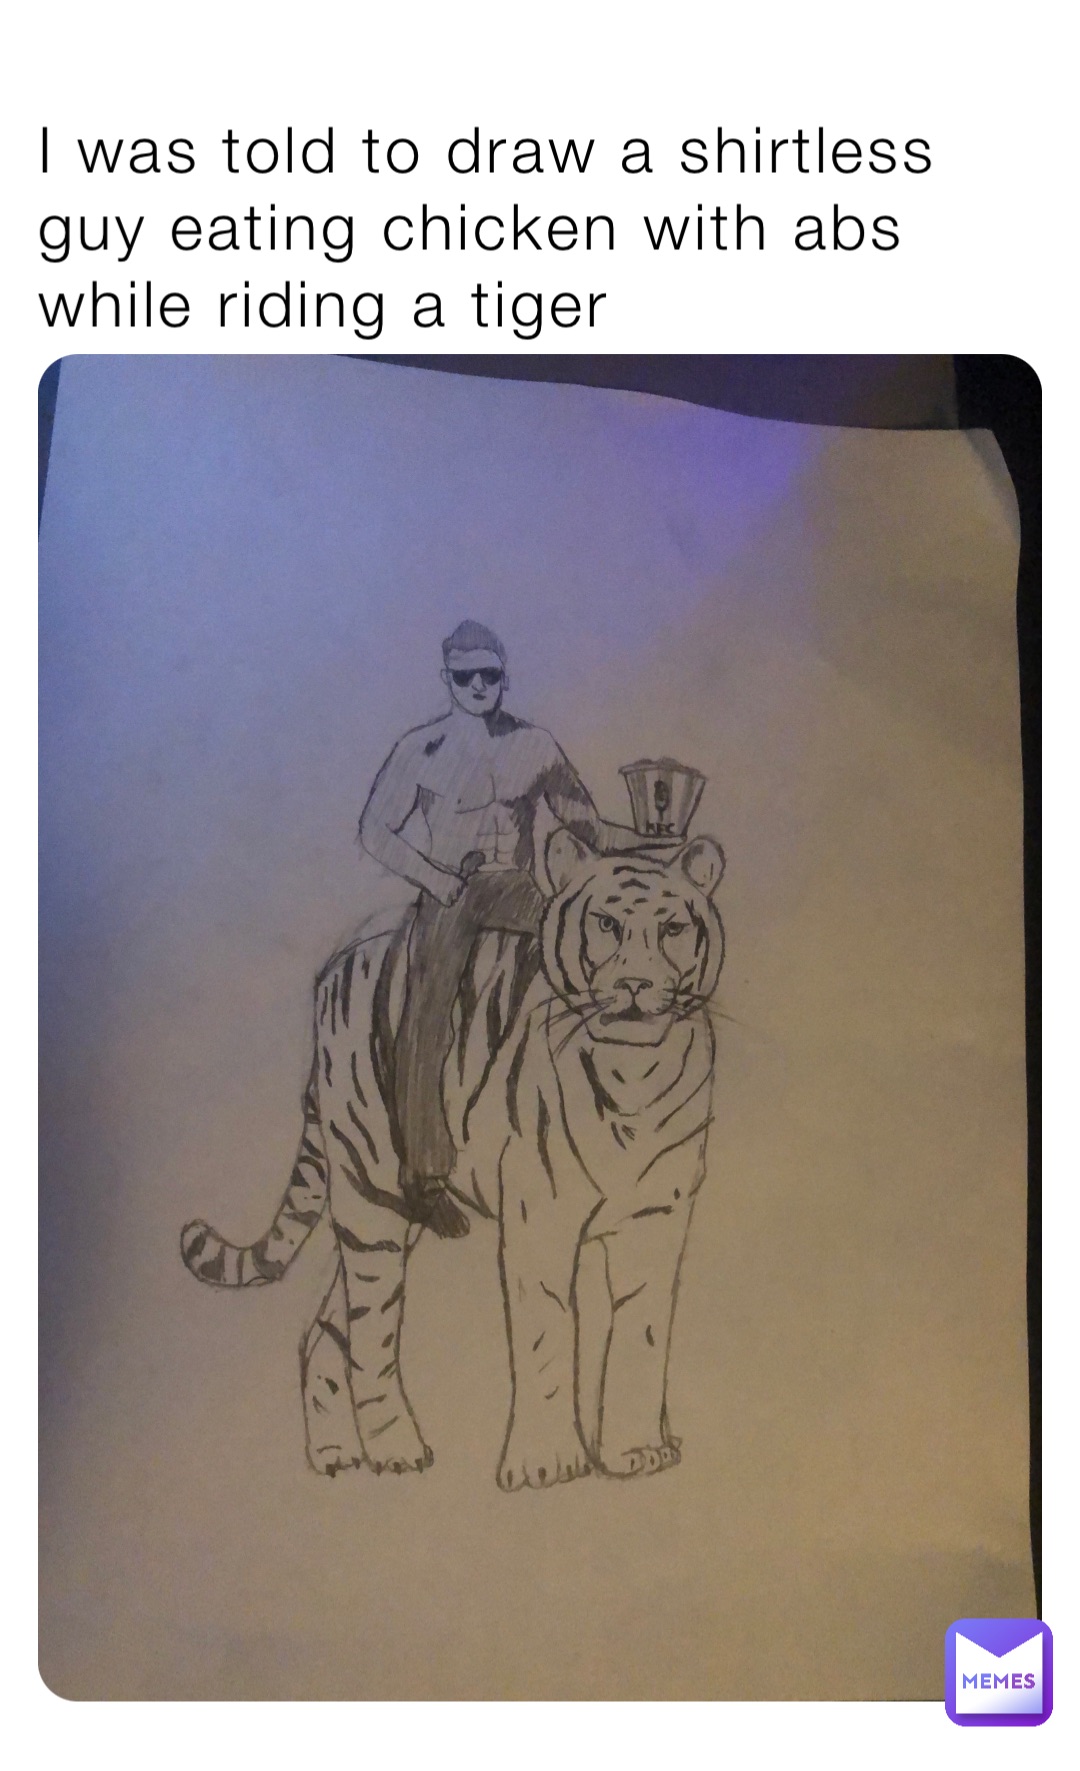 I was told to draw a shirtless guy eating chicken with abs while riding a tiger